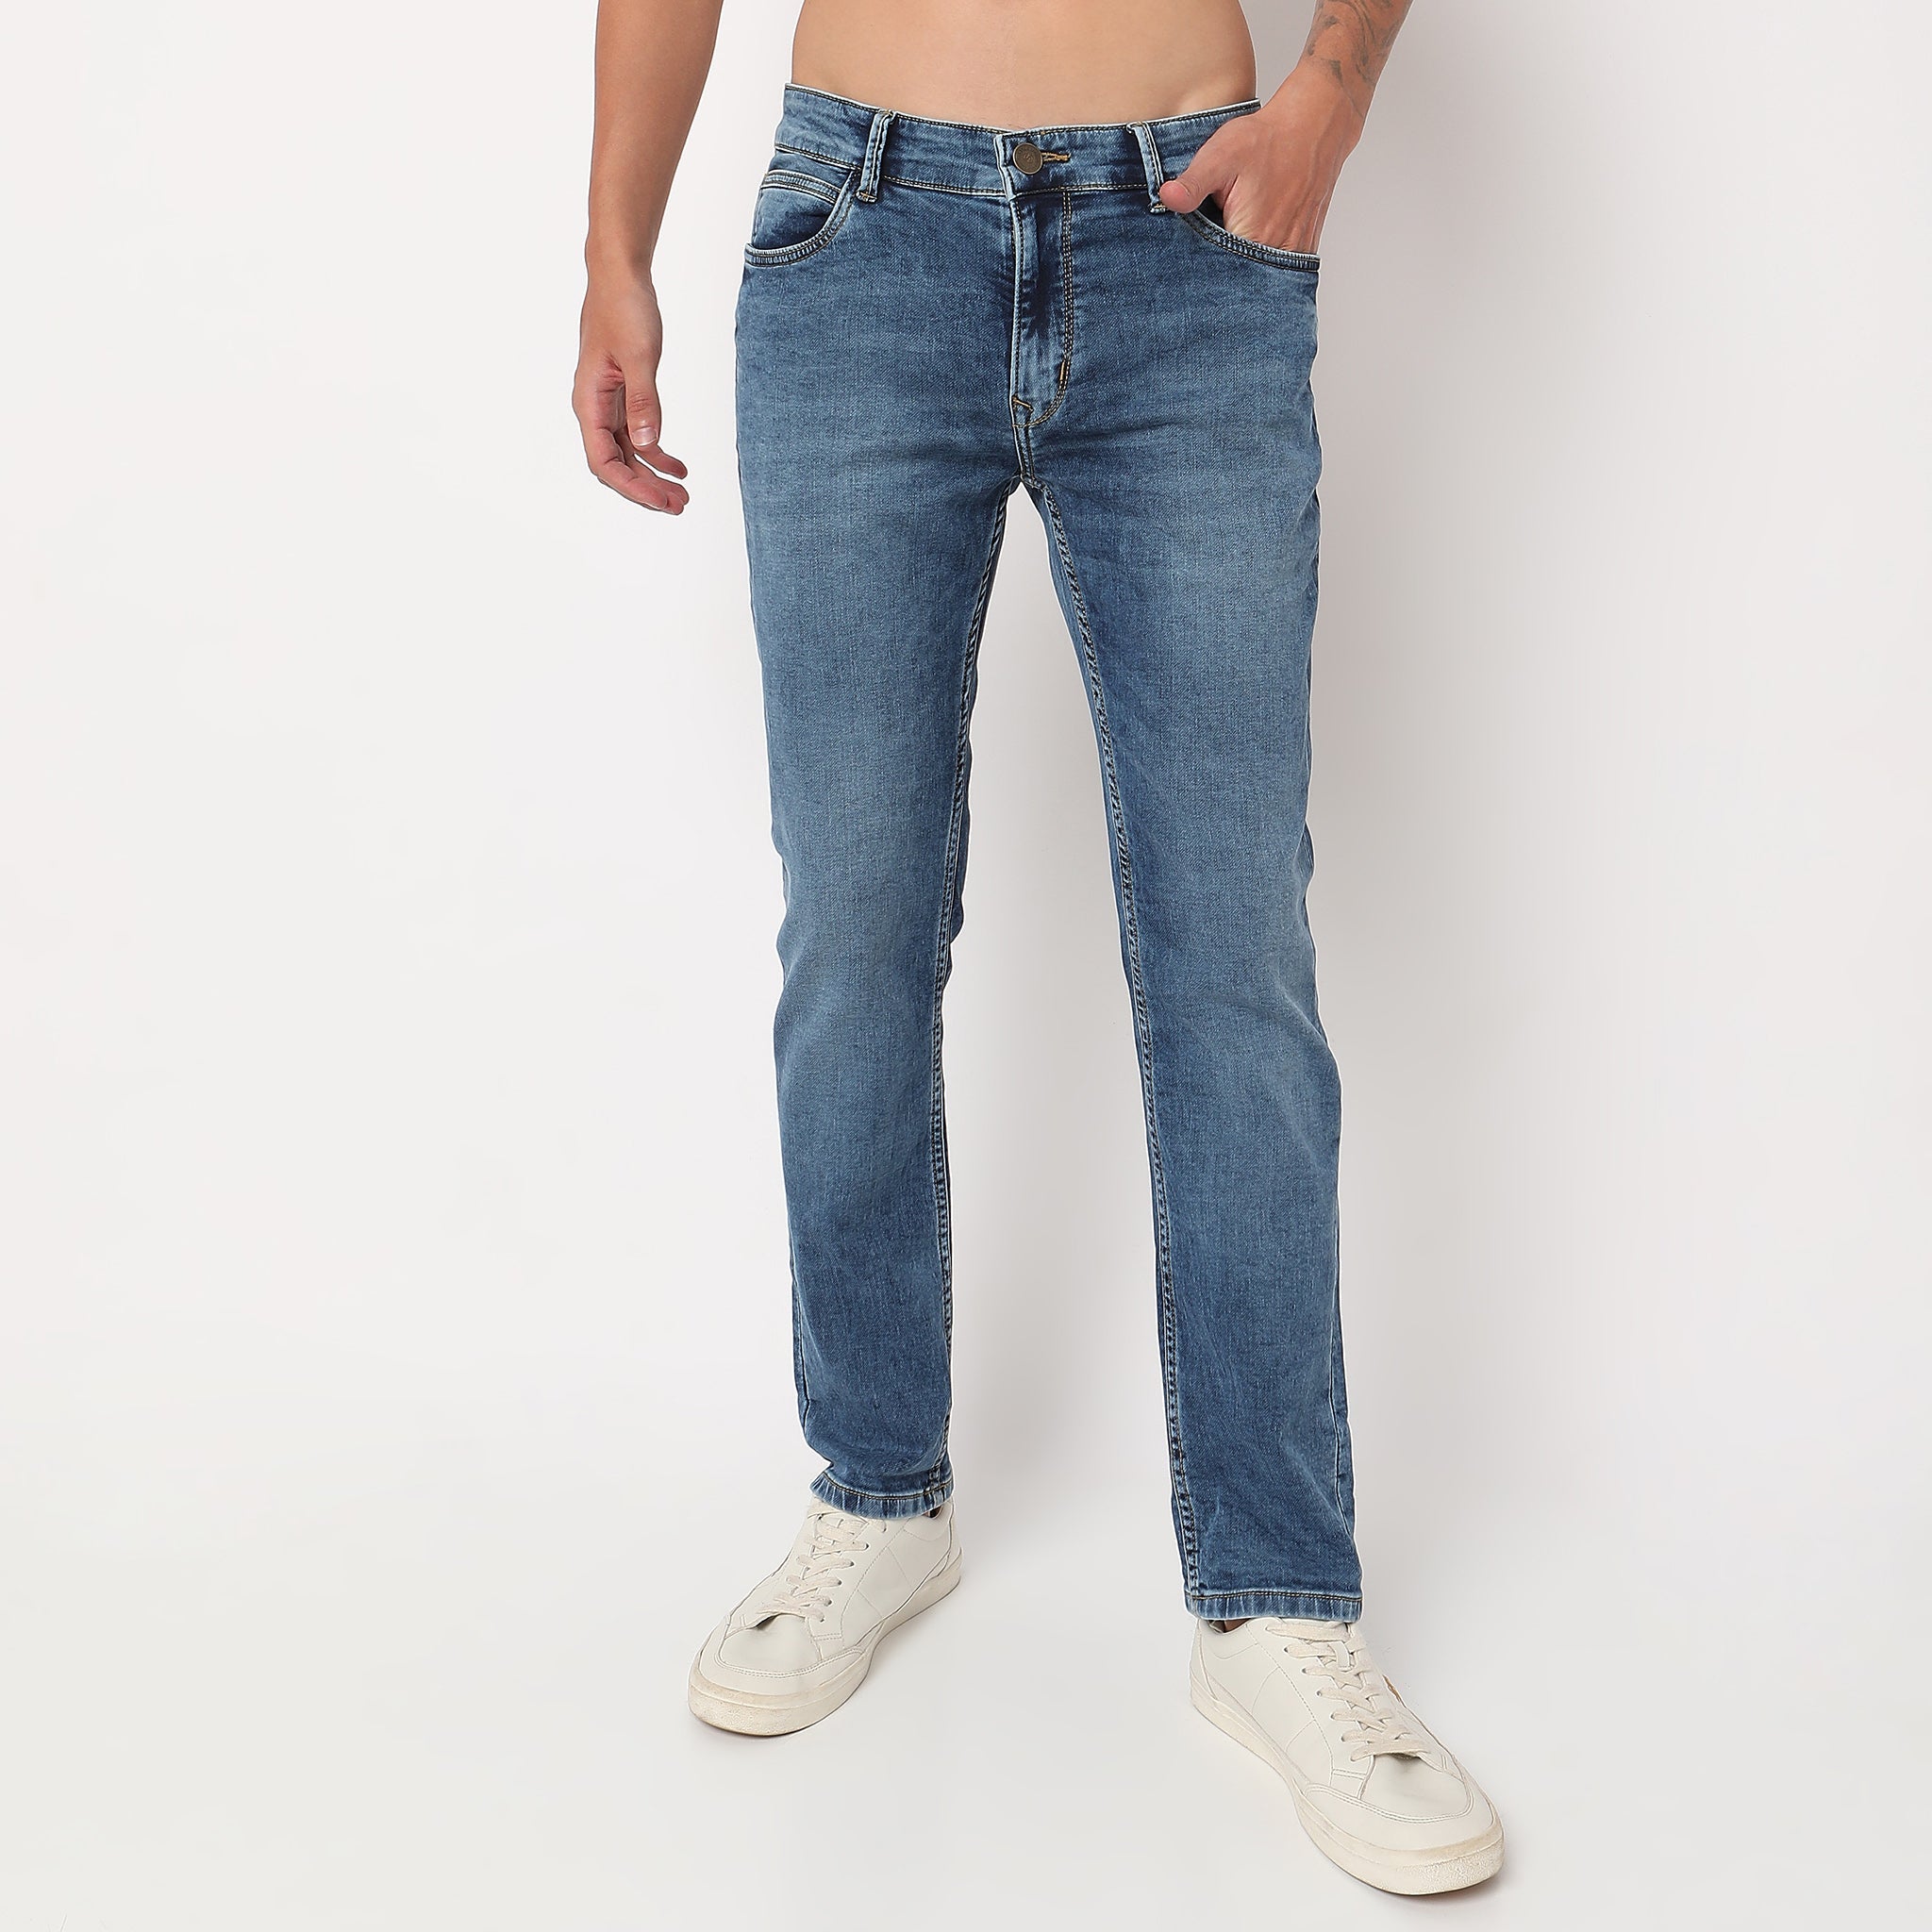 Men Wearing Straight Fit Solid Mid Rise Jean